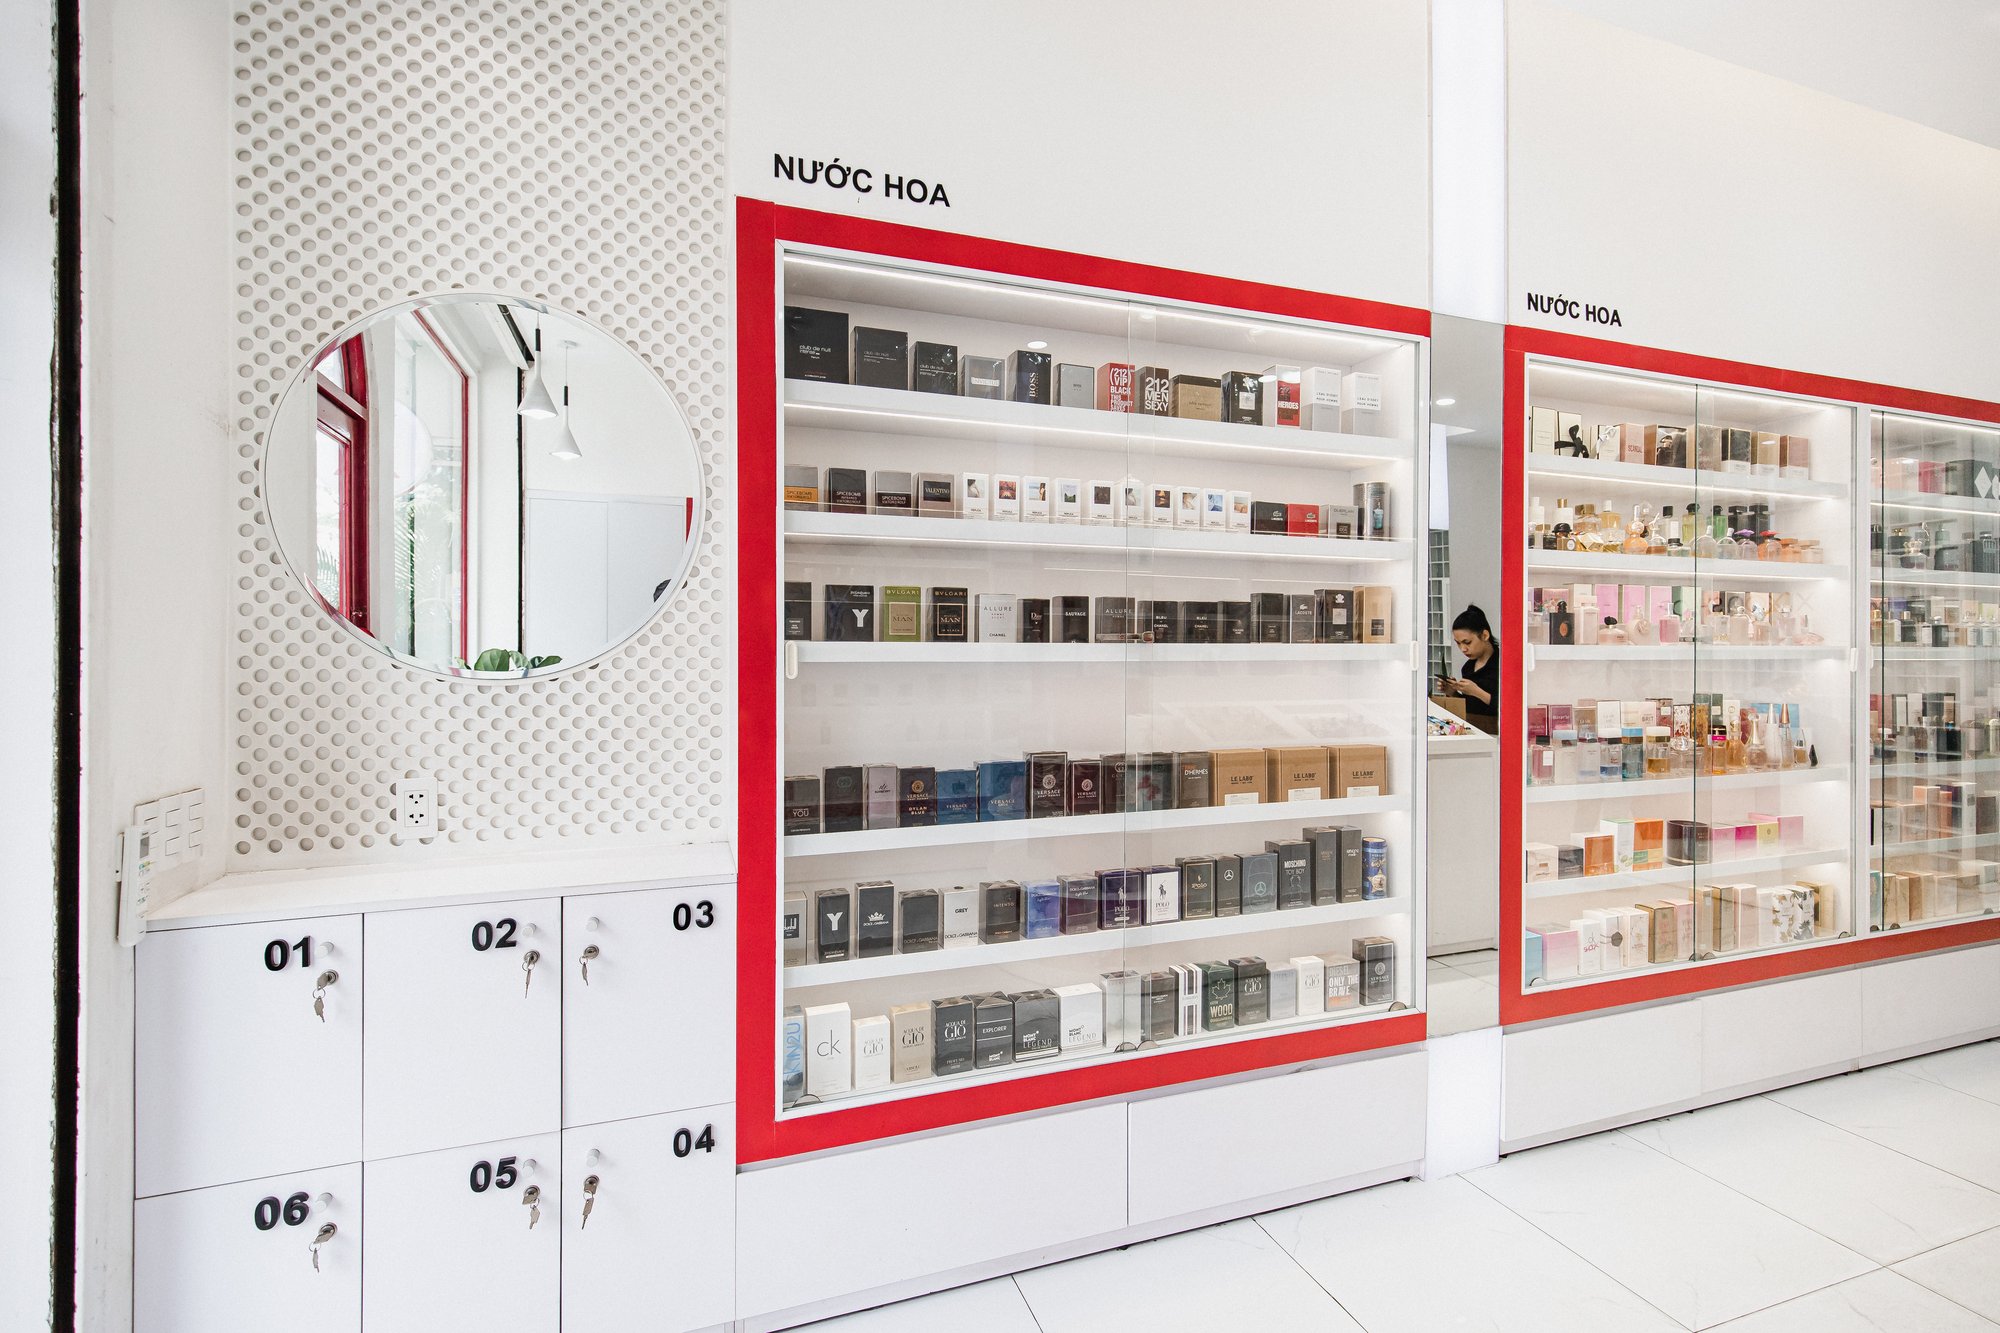 A Perfume Store